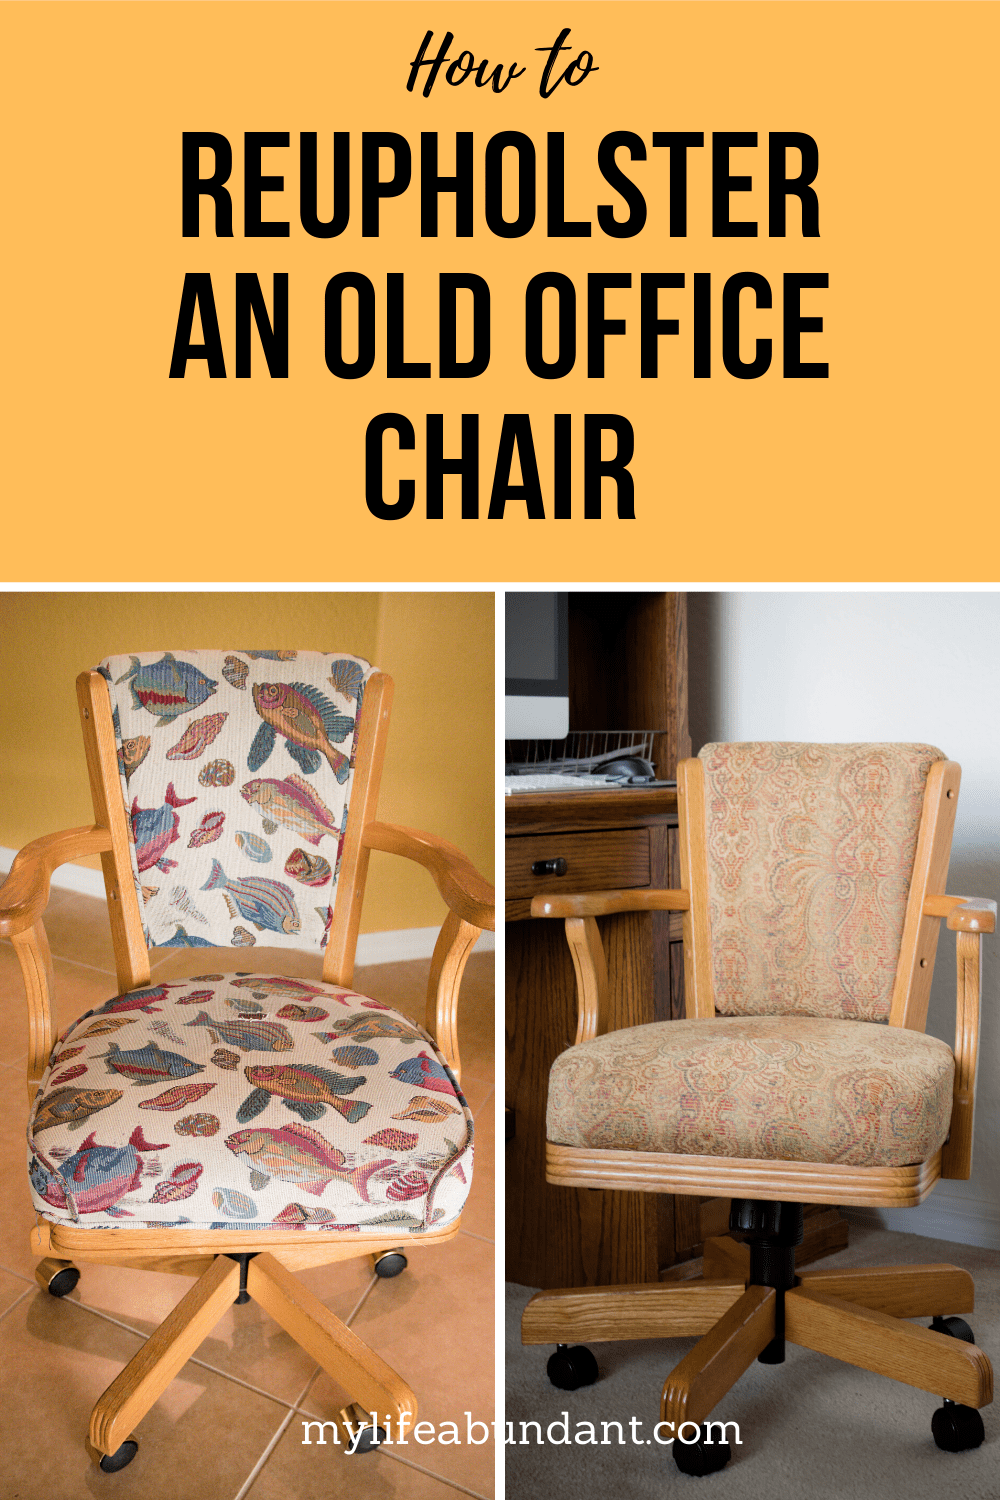 How to Reupholster Chairs: A Simple Step-by-step Guide